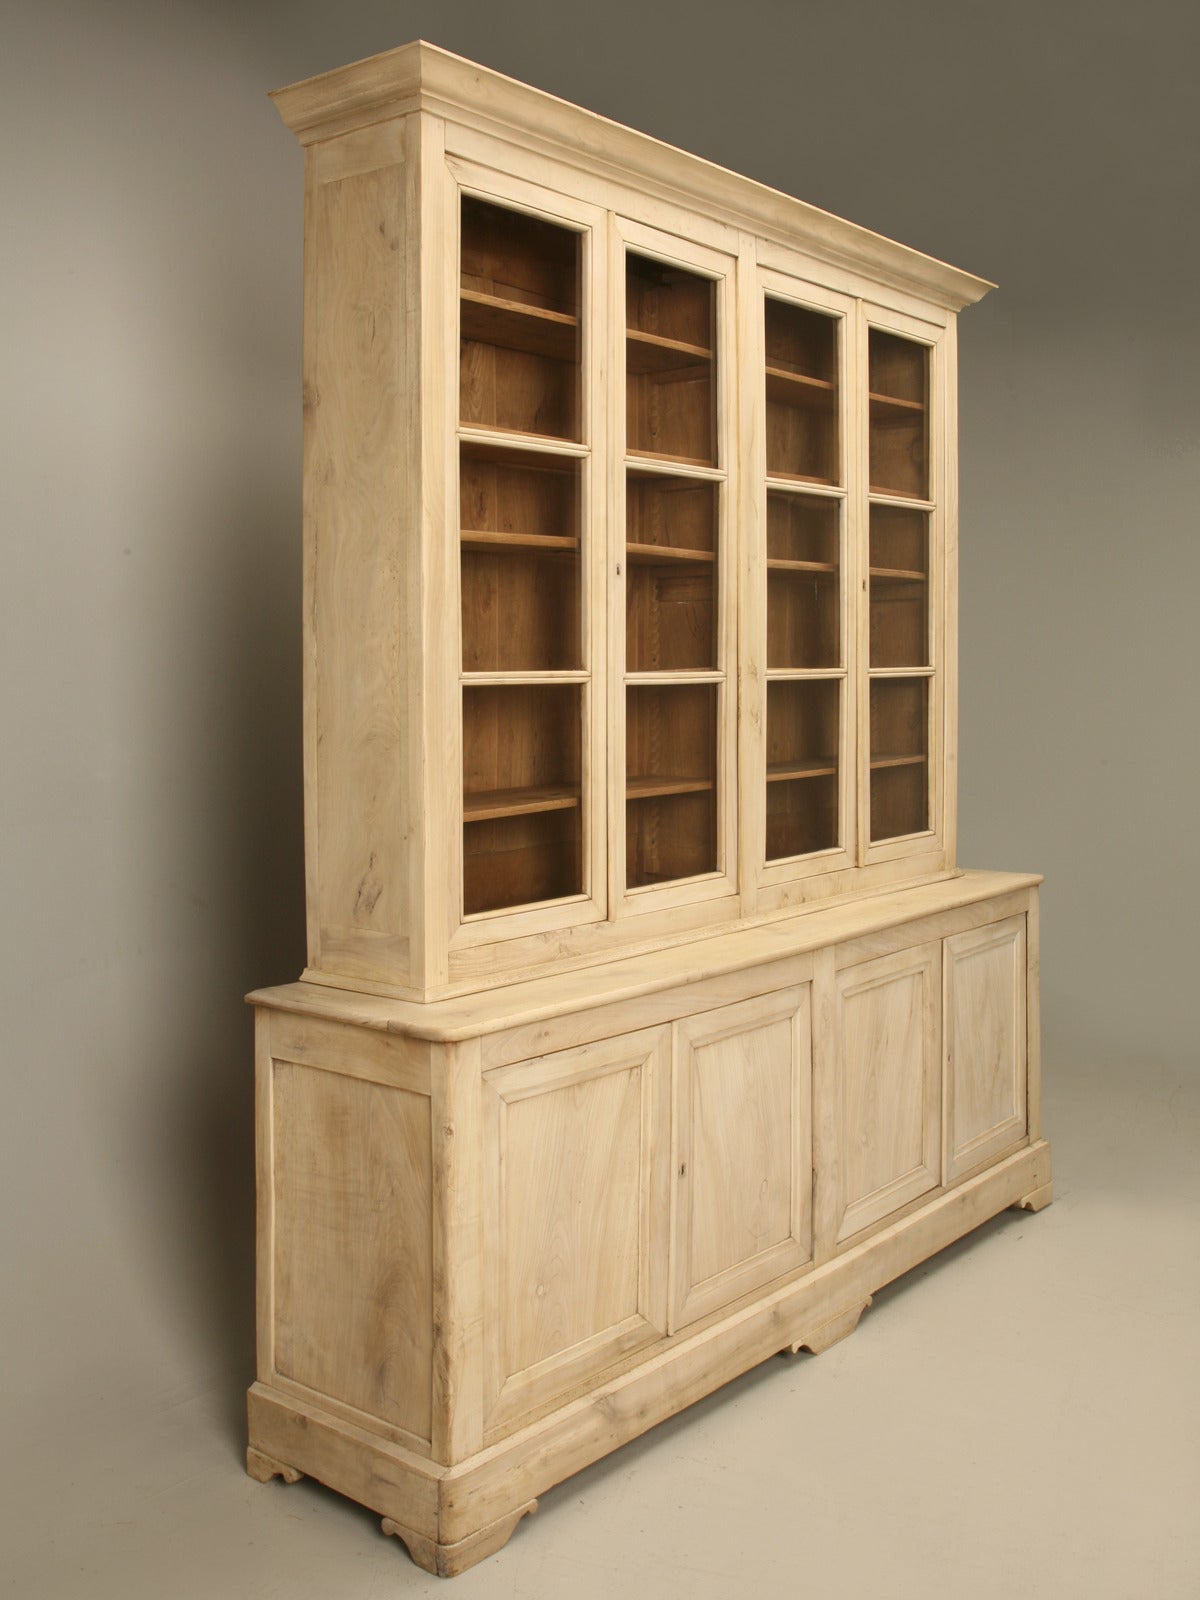 Antique French Walnut bookcase or China cabinet from the late 1800s, that has been thoroughly restored in our Old Plank workshop. They spent over 160 hours of labor completely disassembling and rebuilding the cabinet correctly. The exterior was then